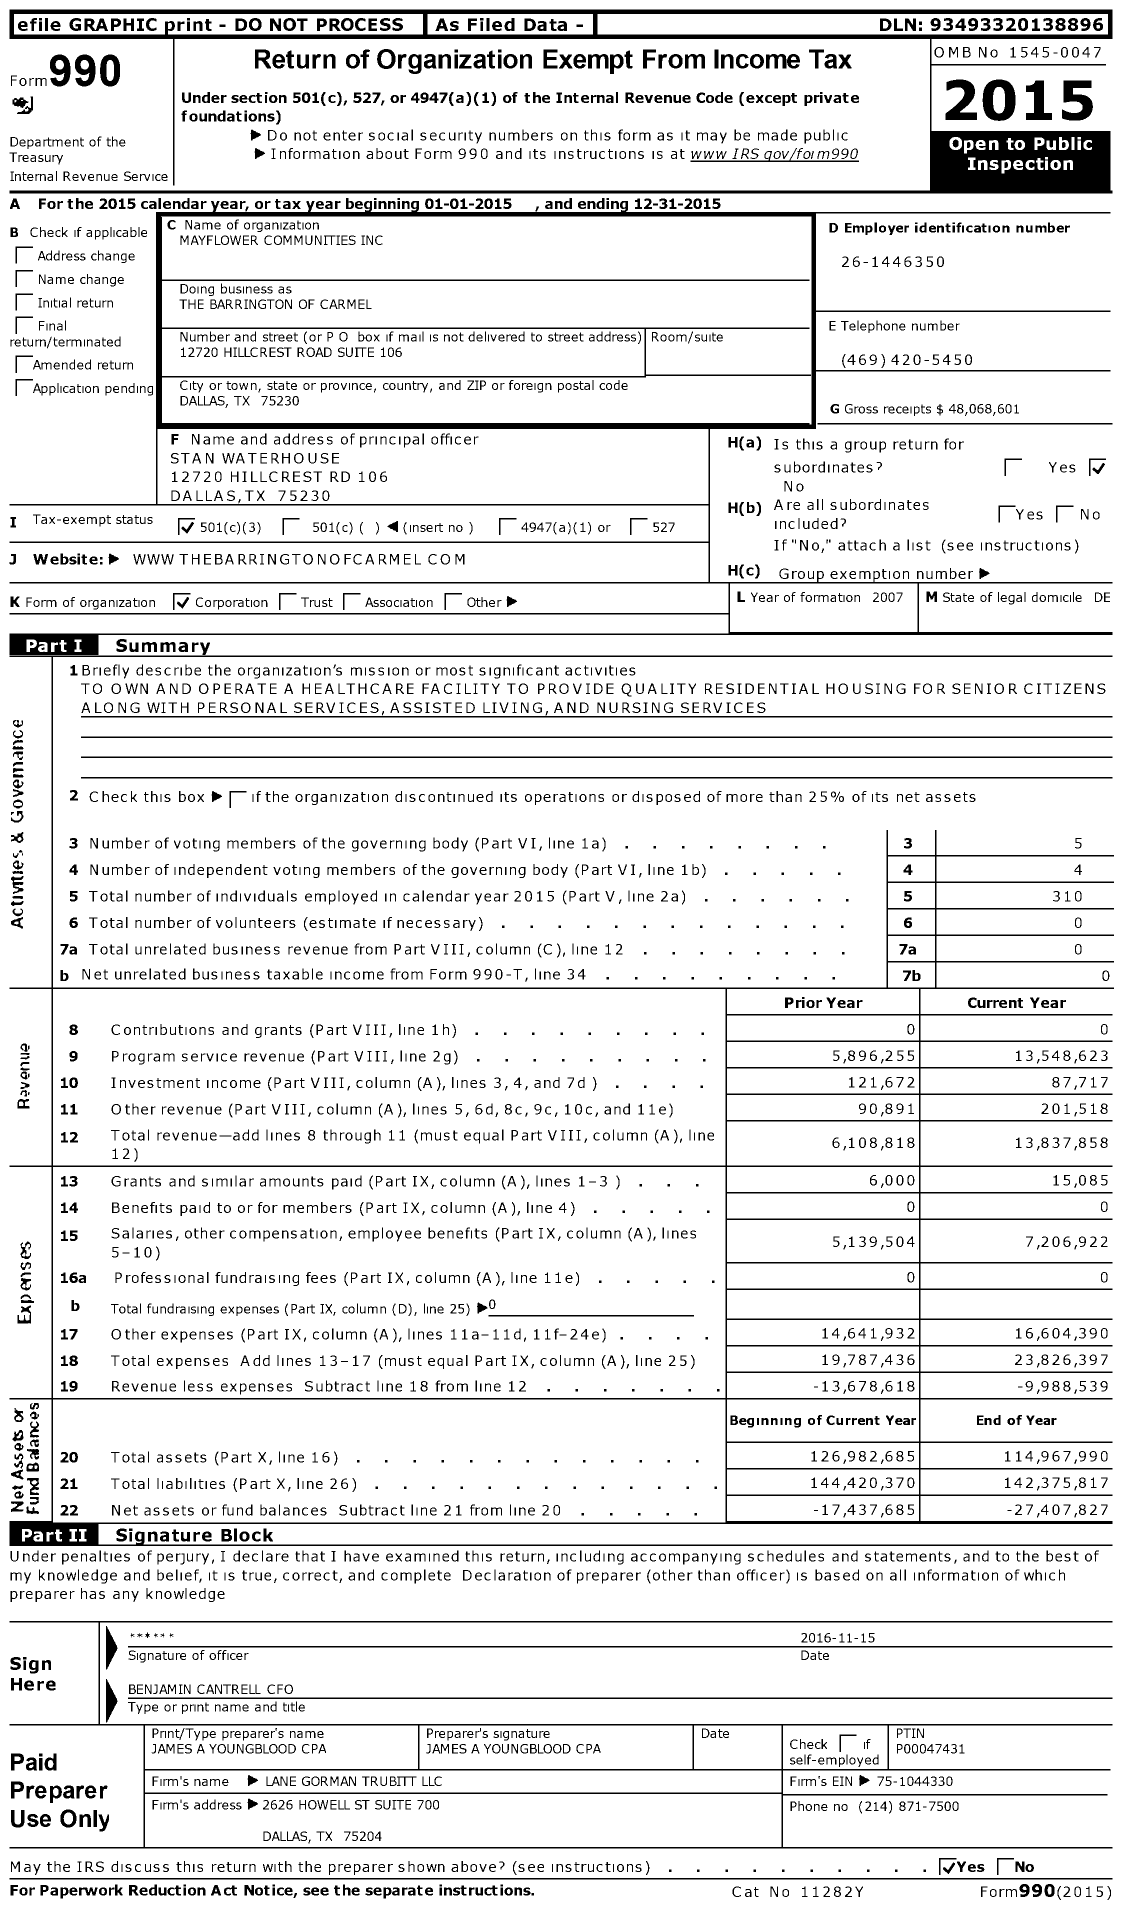 Image of first page of 2015 Form 990 for Barrington of Carmel